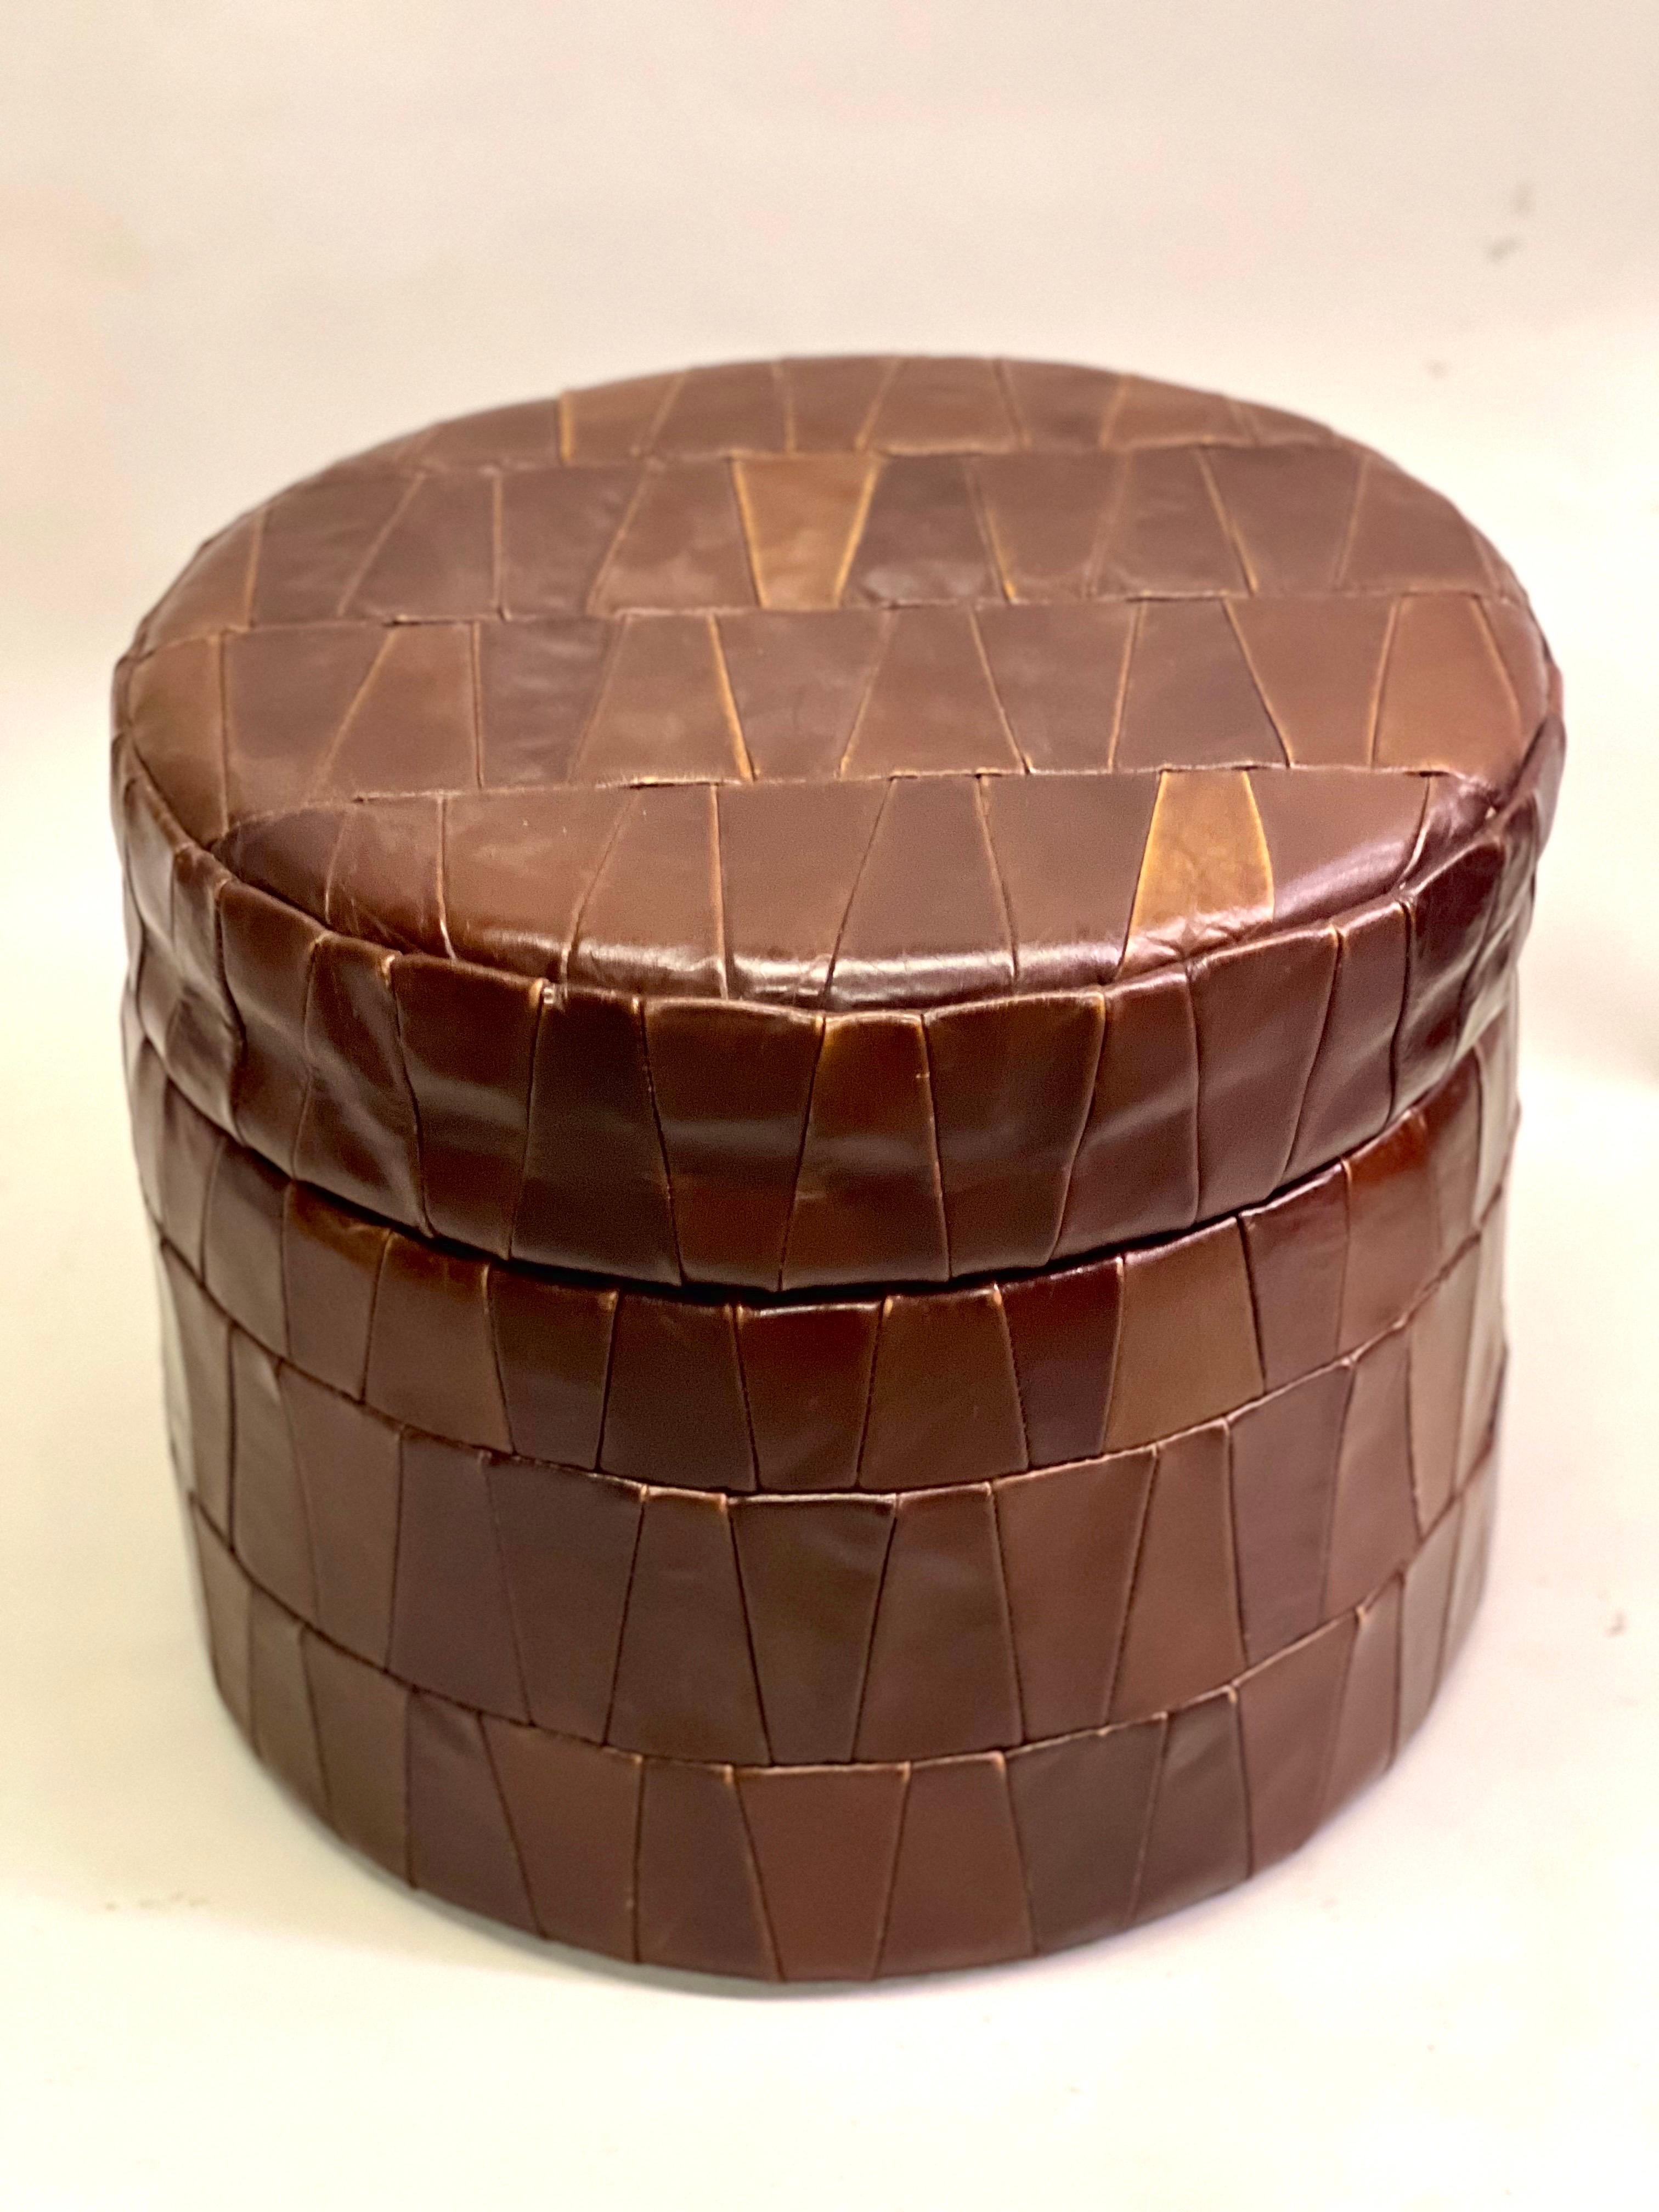 Pair of Swiss Modern Patchwork Leather Storage Ottomans/ Stools by De Sede, 1960 For Sale 3